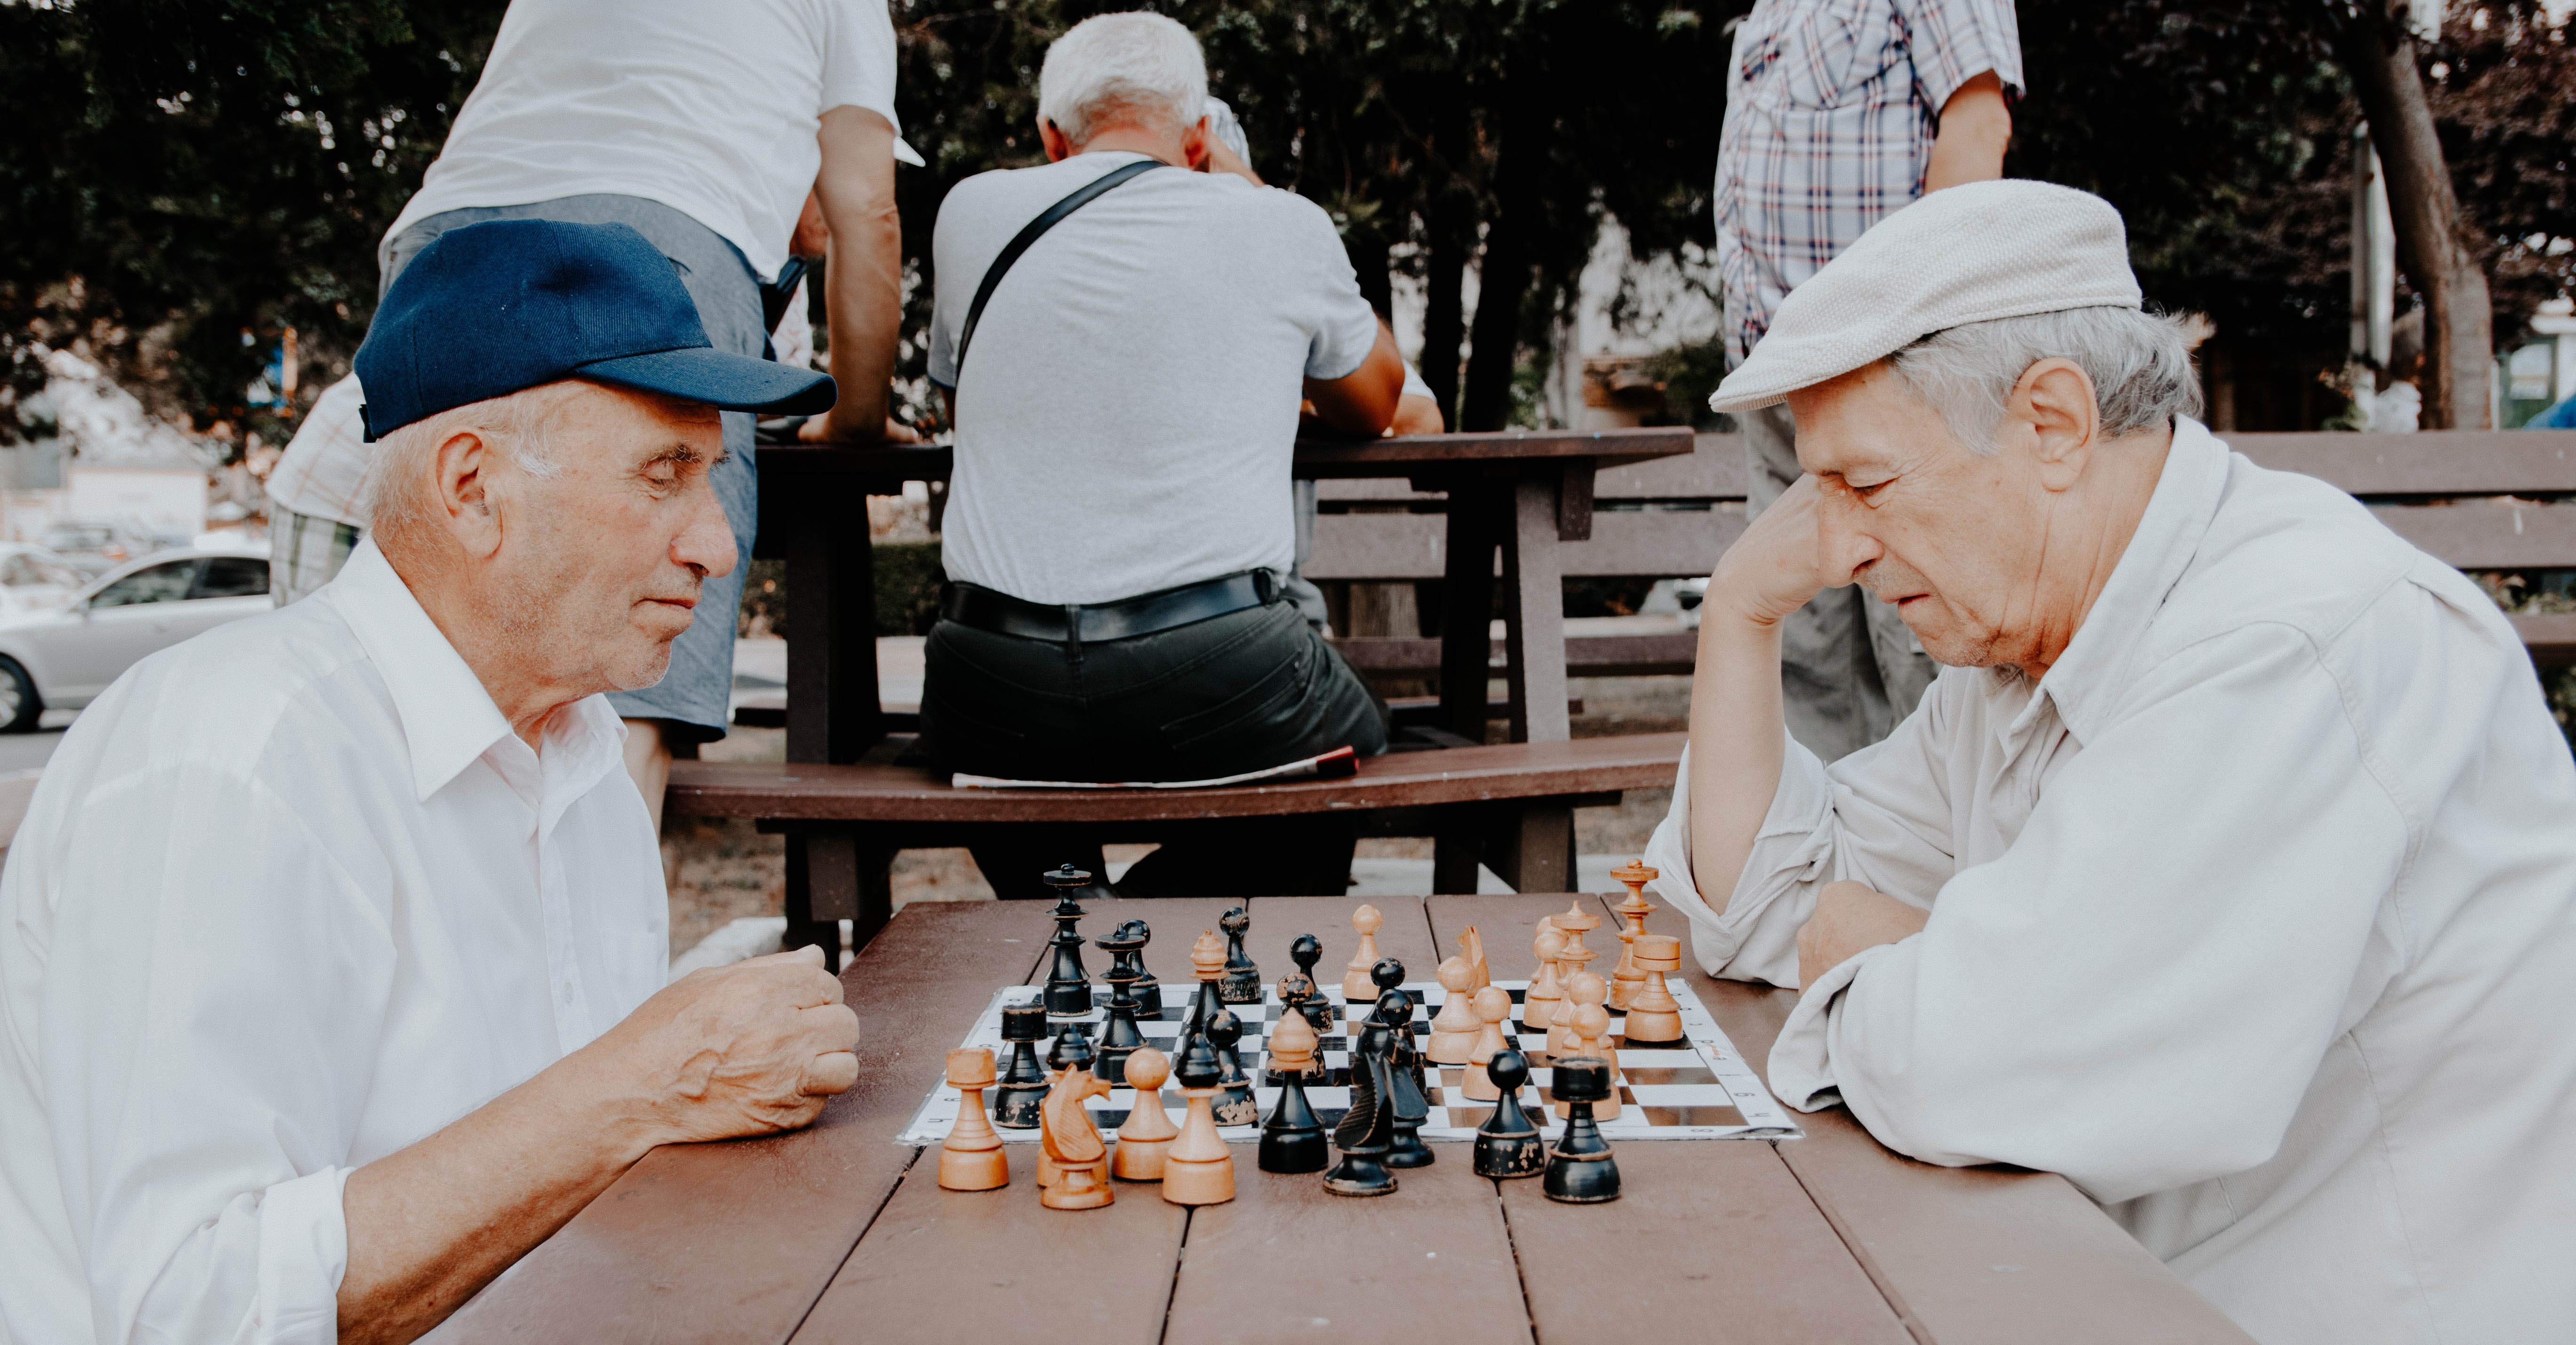 Two older adult men play chess in a park